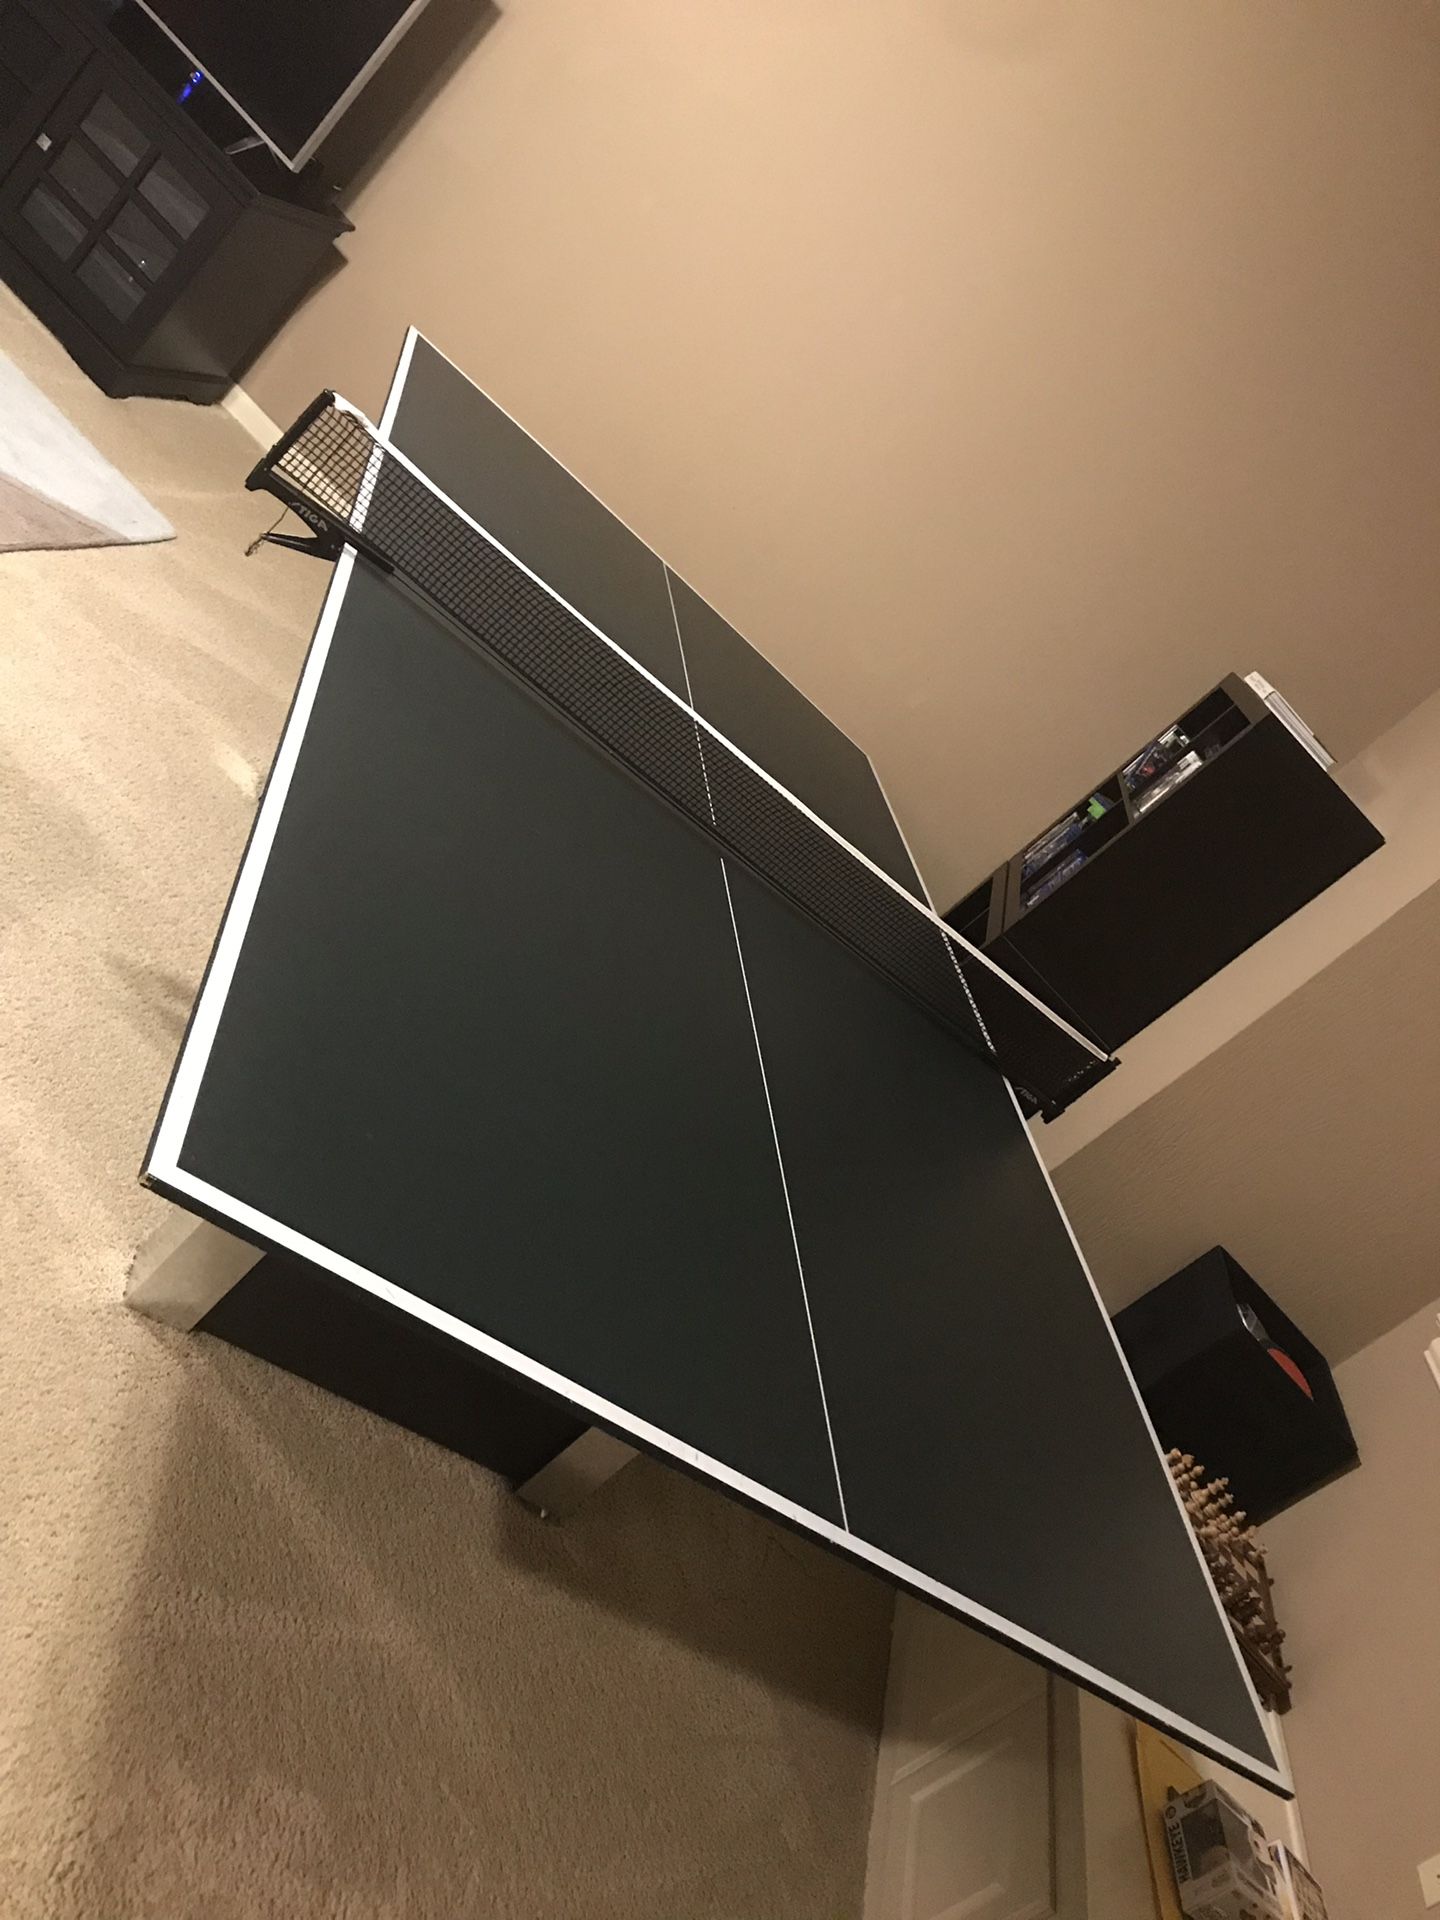 Air hockey table with ping pong table topper